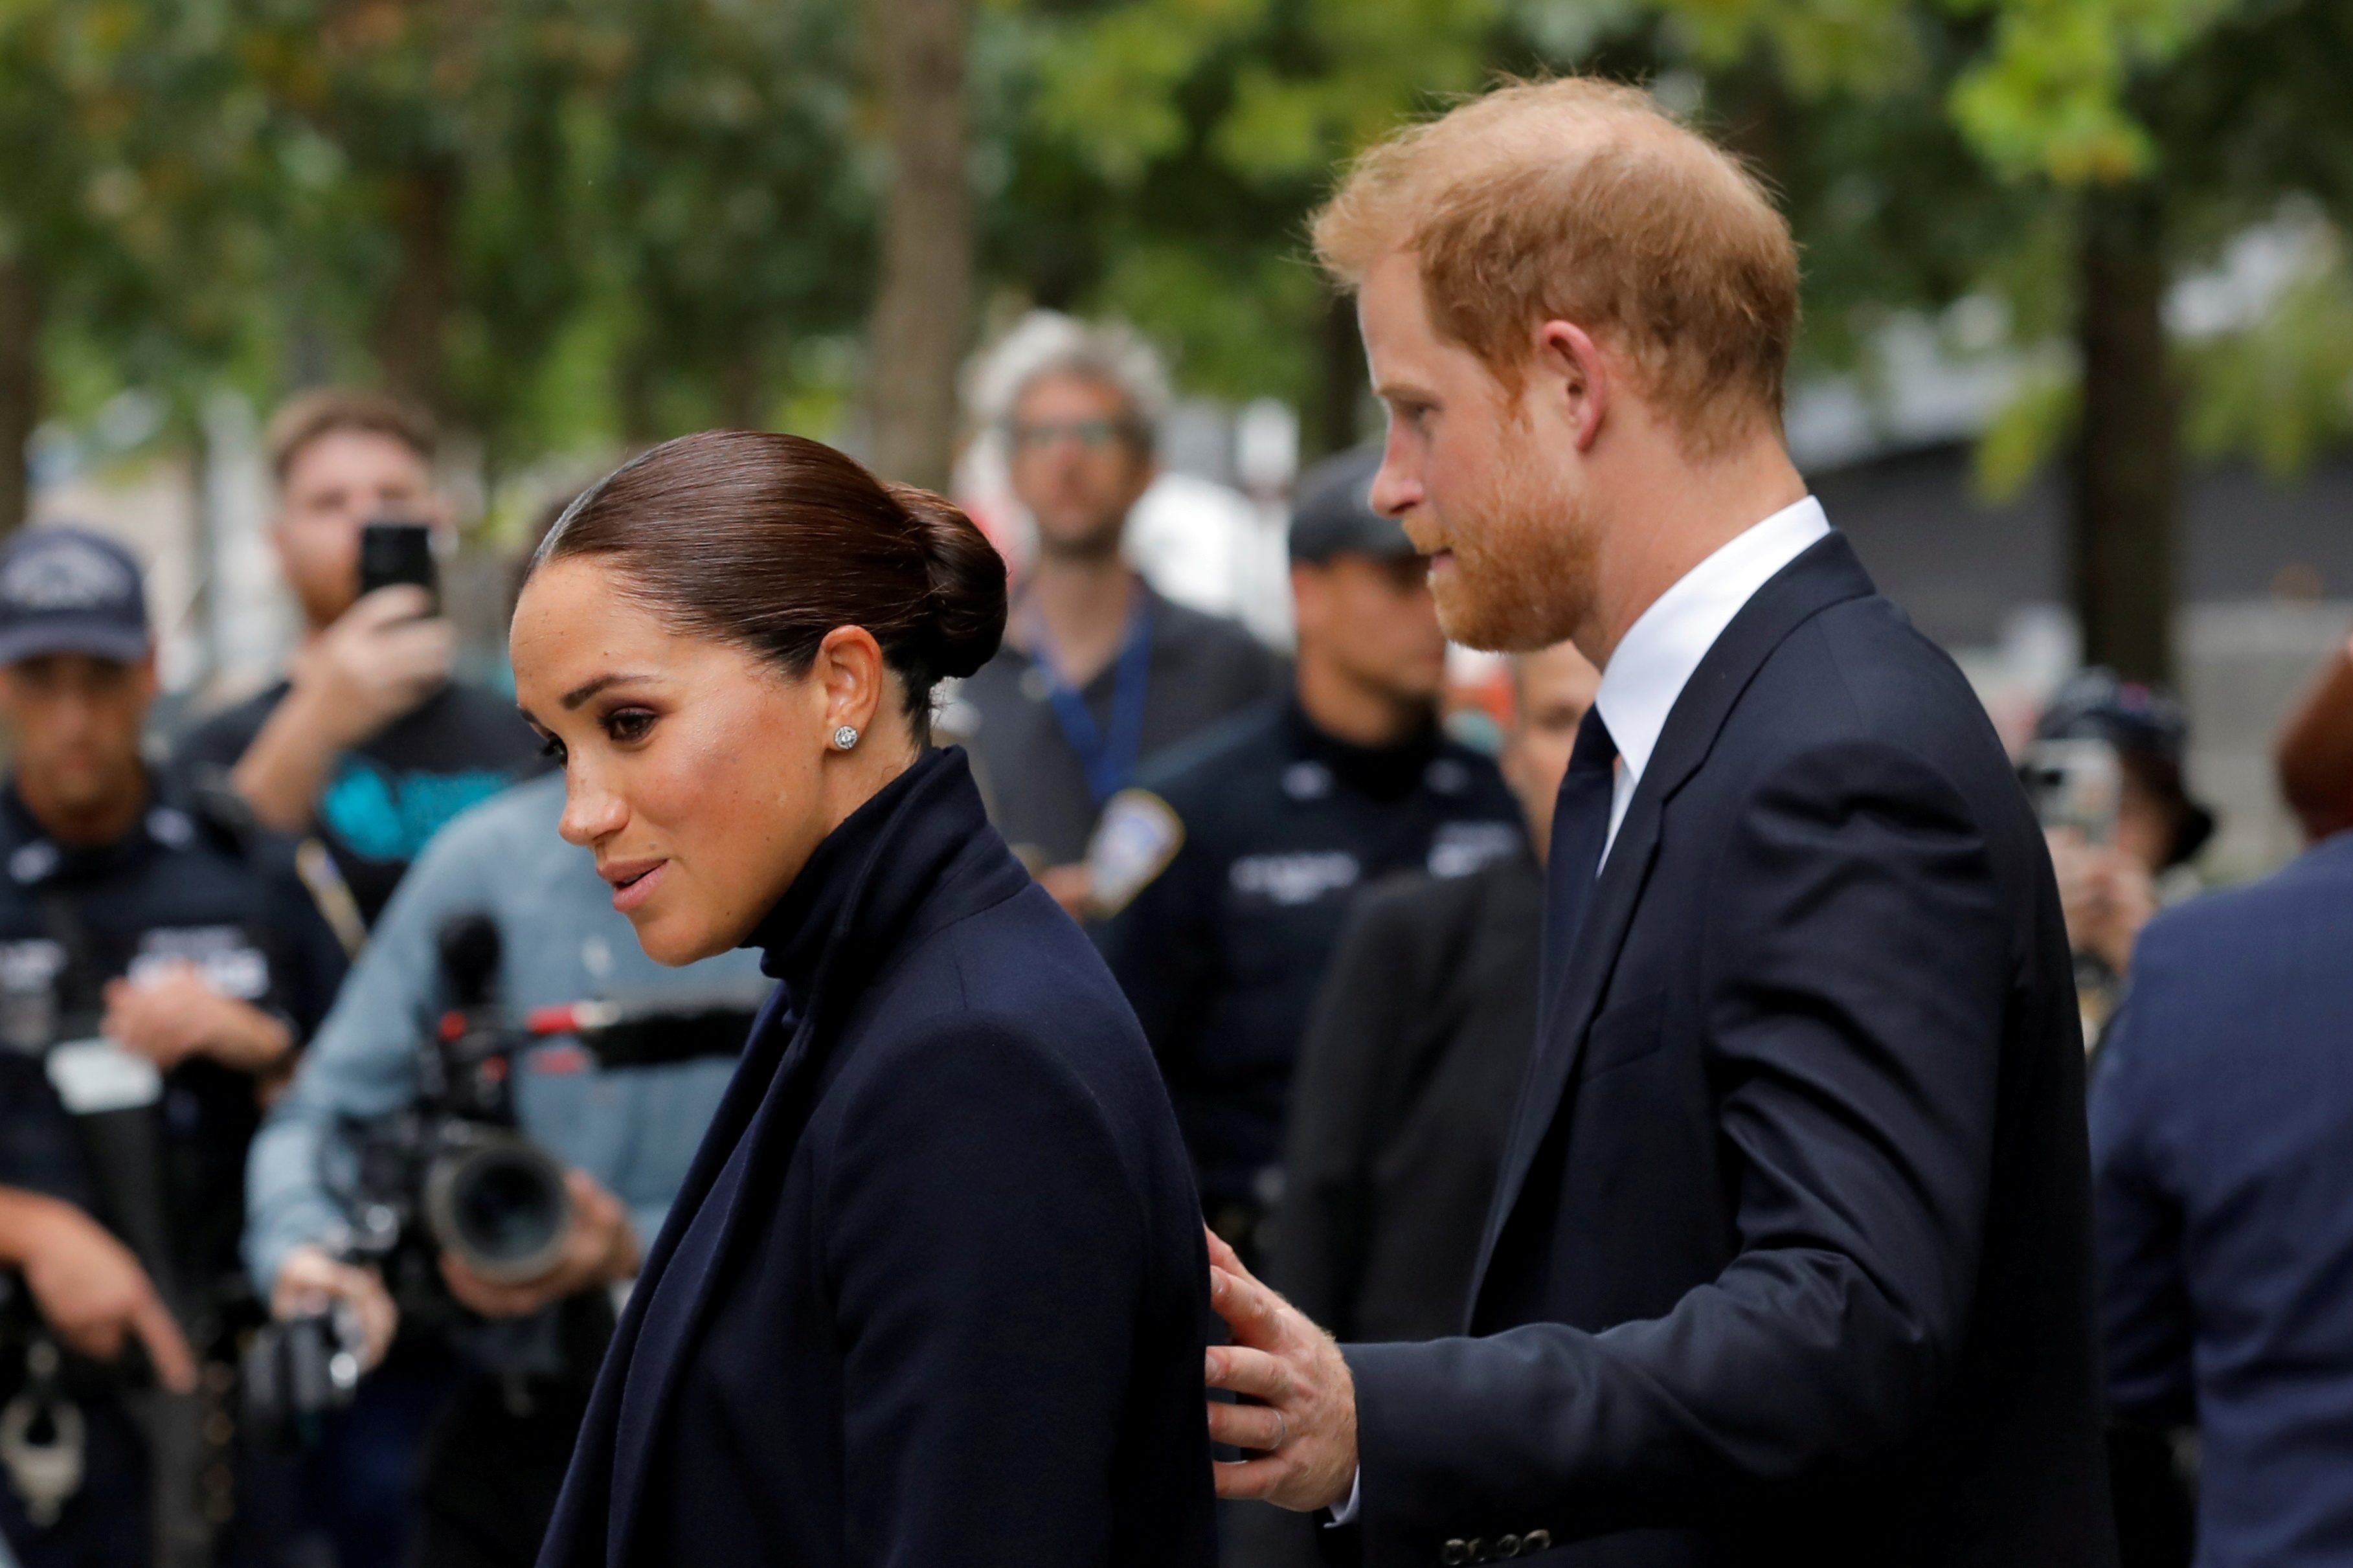 UK royals berated Harry over Meghan’s father, texts from duchess said